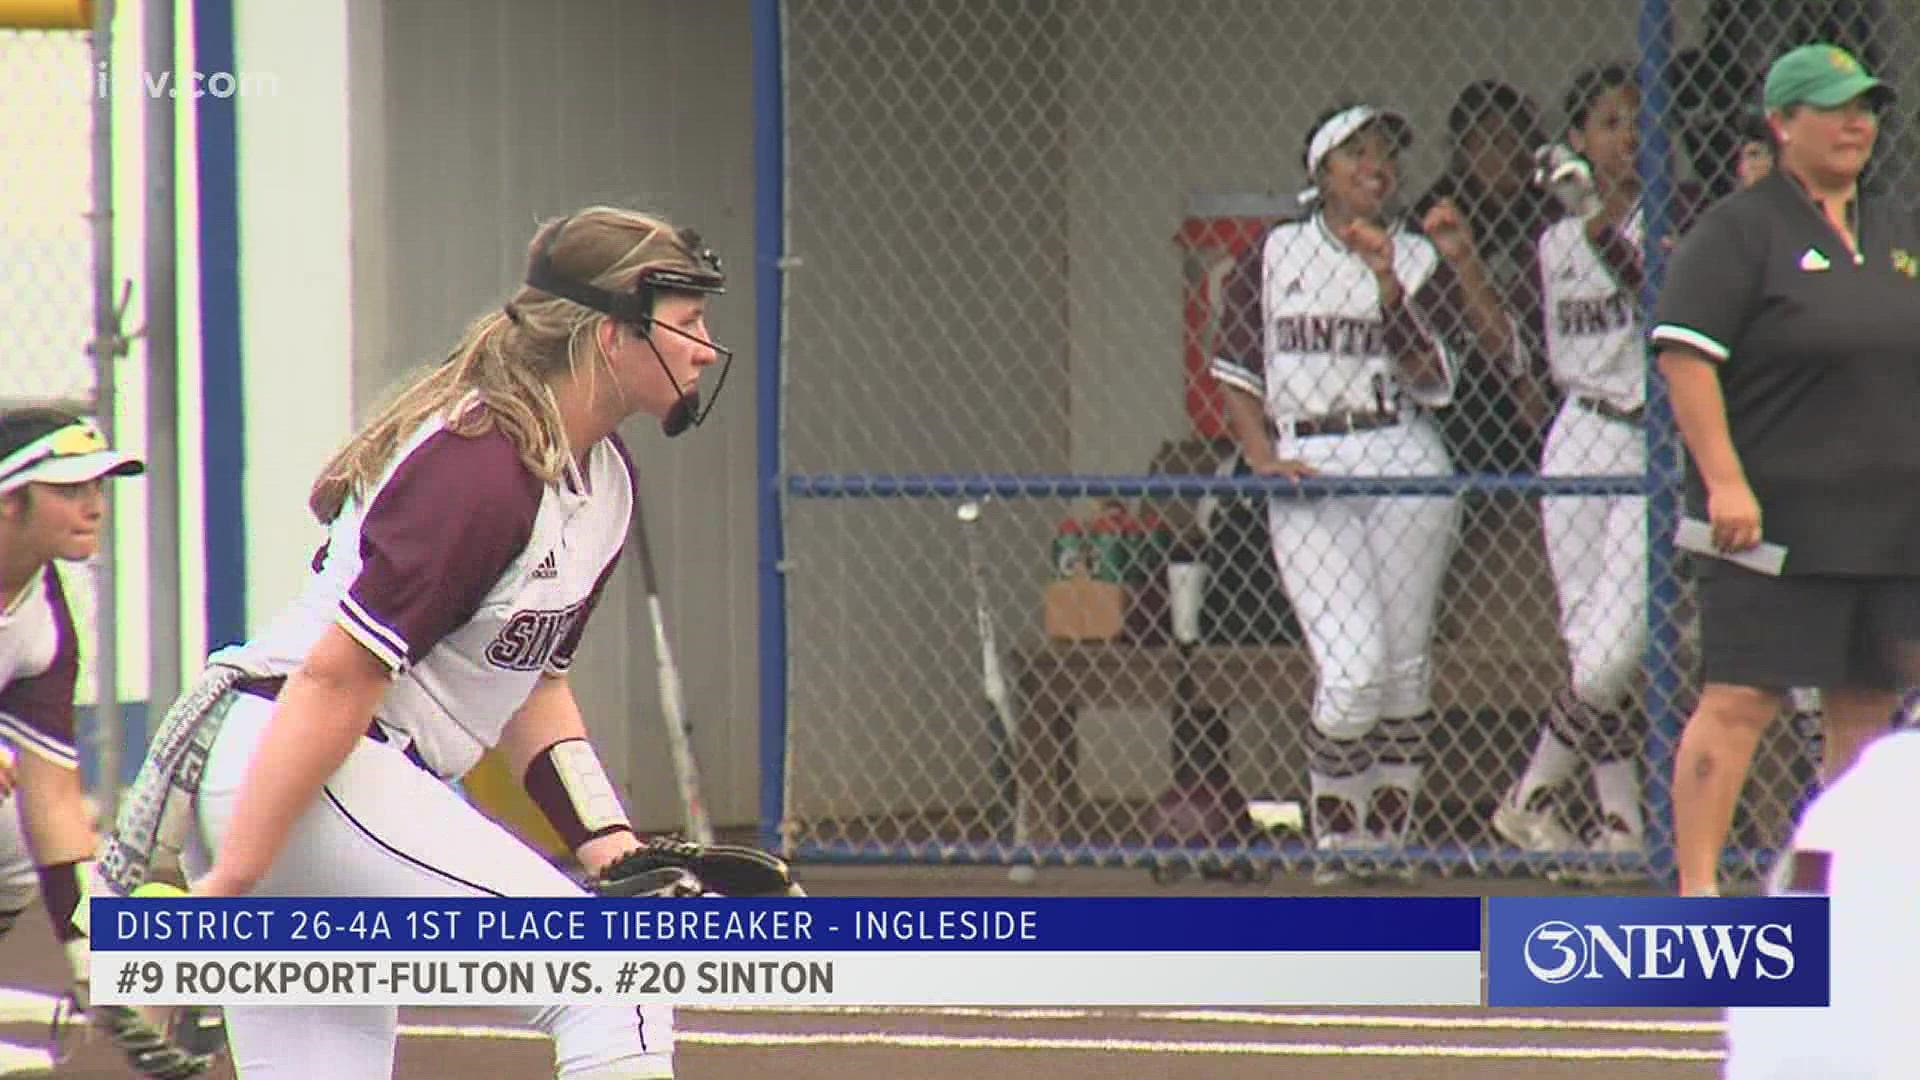 Sinton needed 11 innings to top Rockport-Fulton 2-1 and claim the #1 seed out of 26-4A. RF drops to the #2 seed.